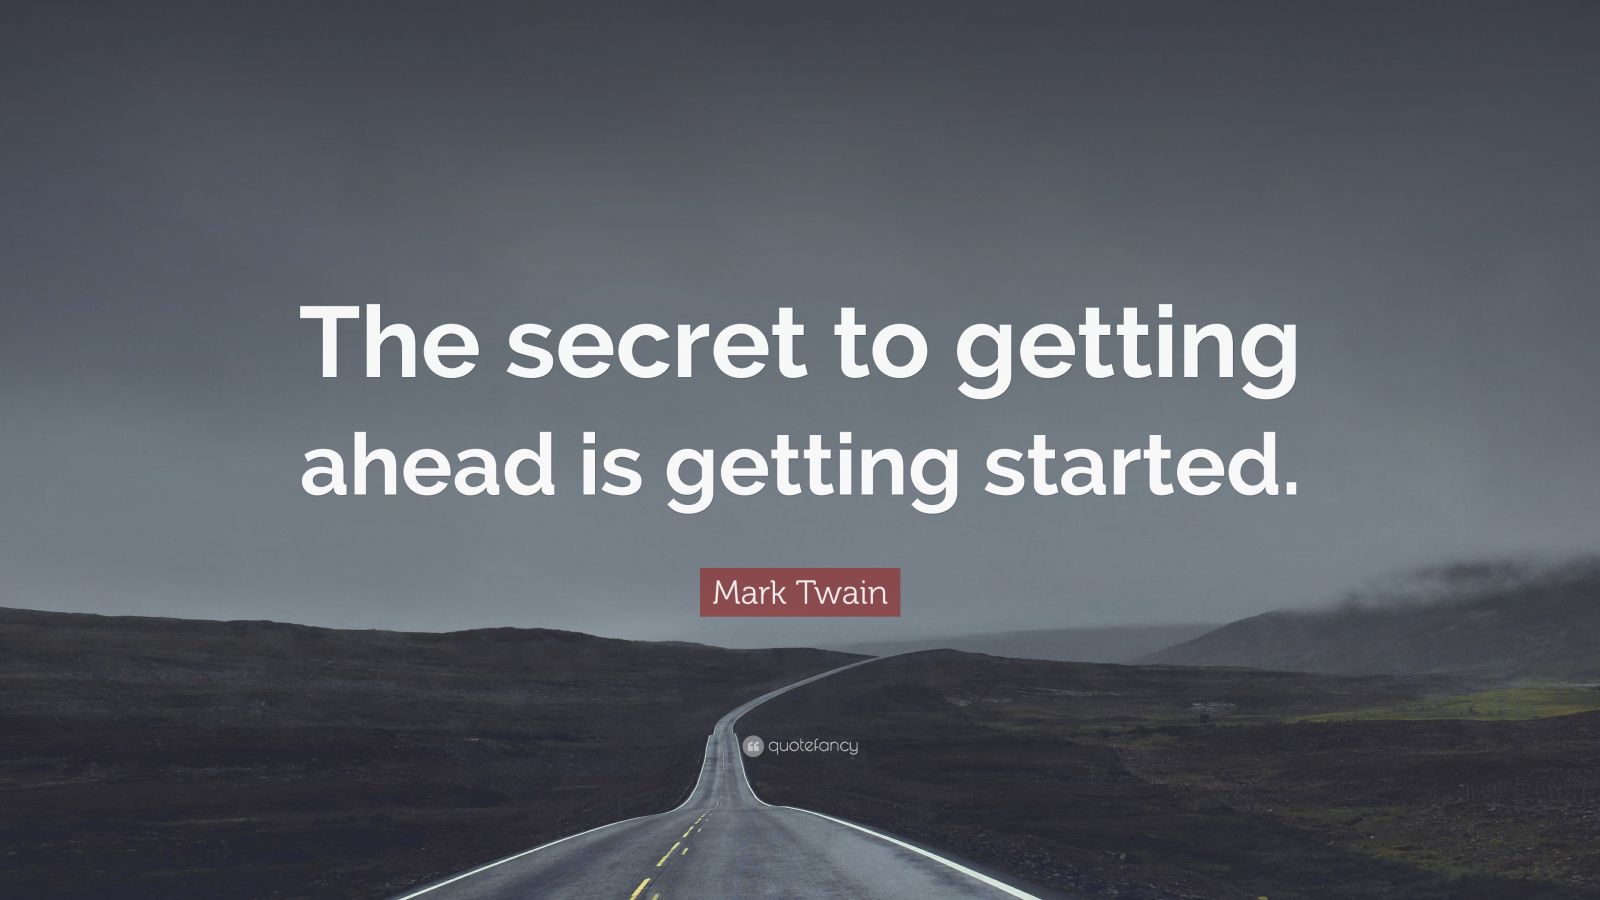 Mark Twain Quote: “The secret to getting ahead is getting started.” (31